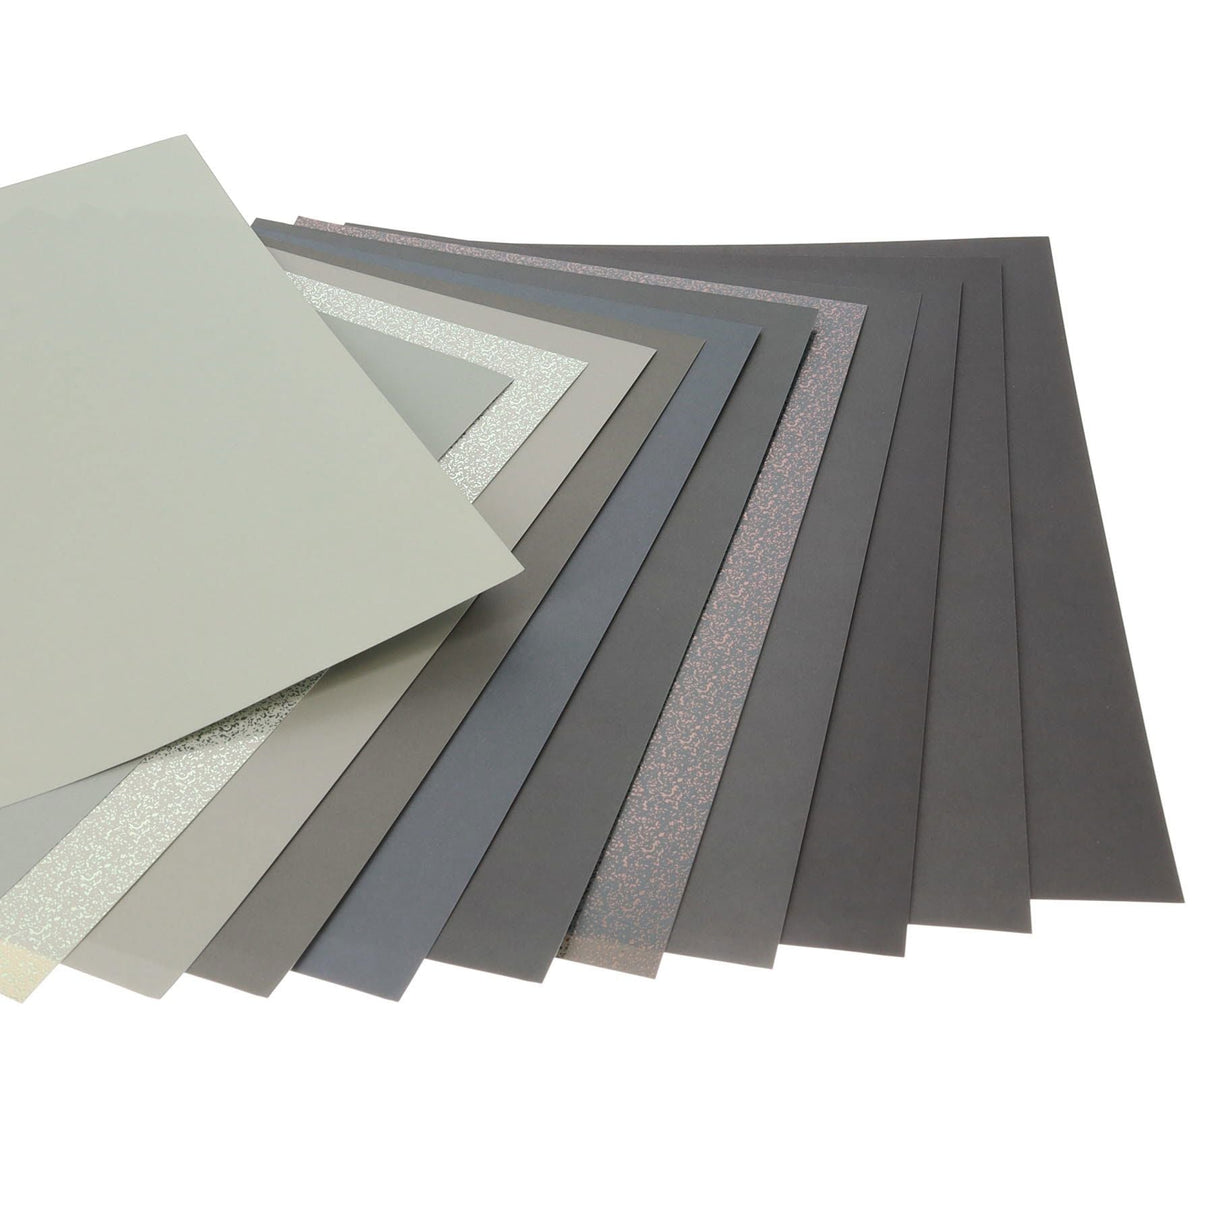 Premier Activity A4 Paper Pad - 24 Sheets - 180gsm - Shades of Silver | Stationery Shop UK